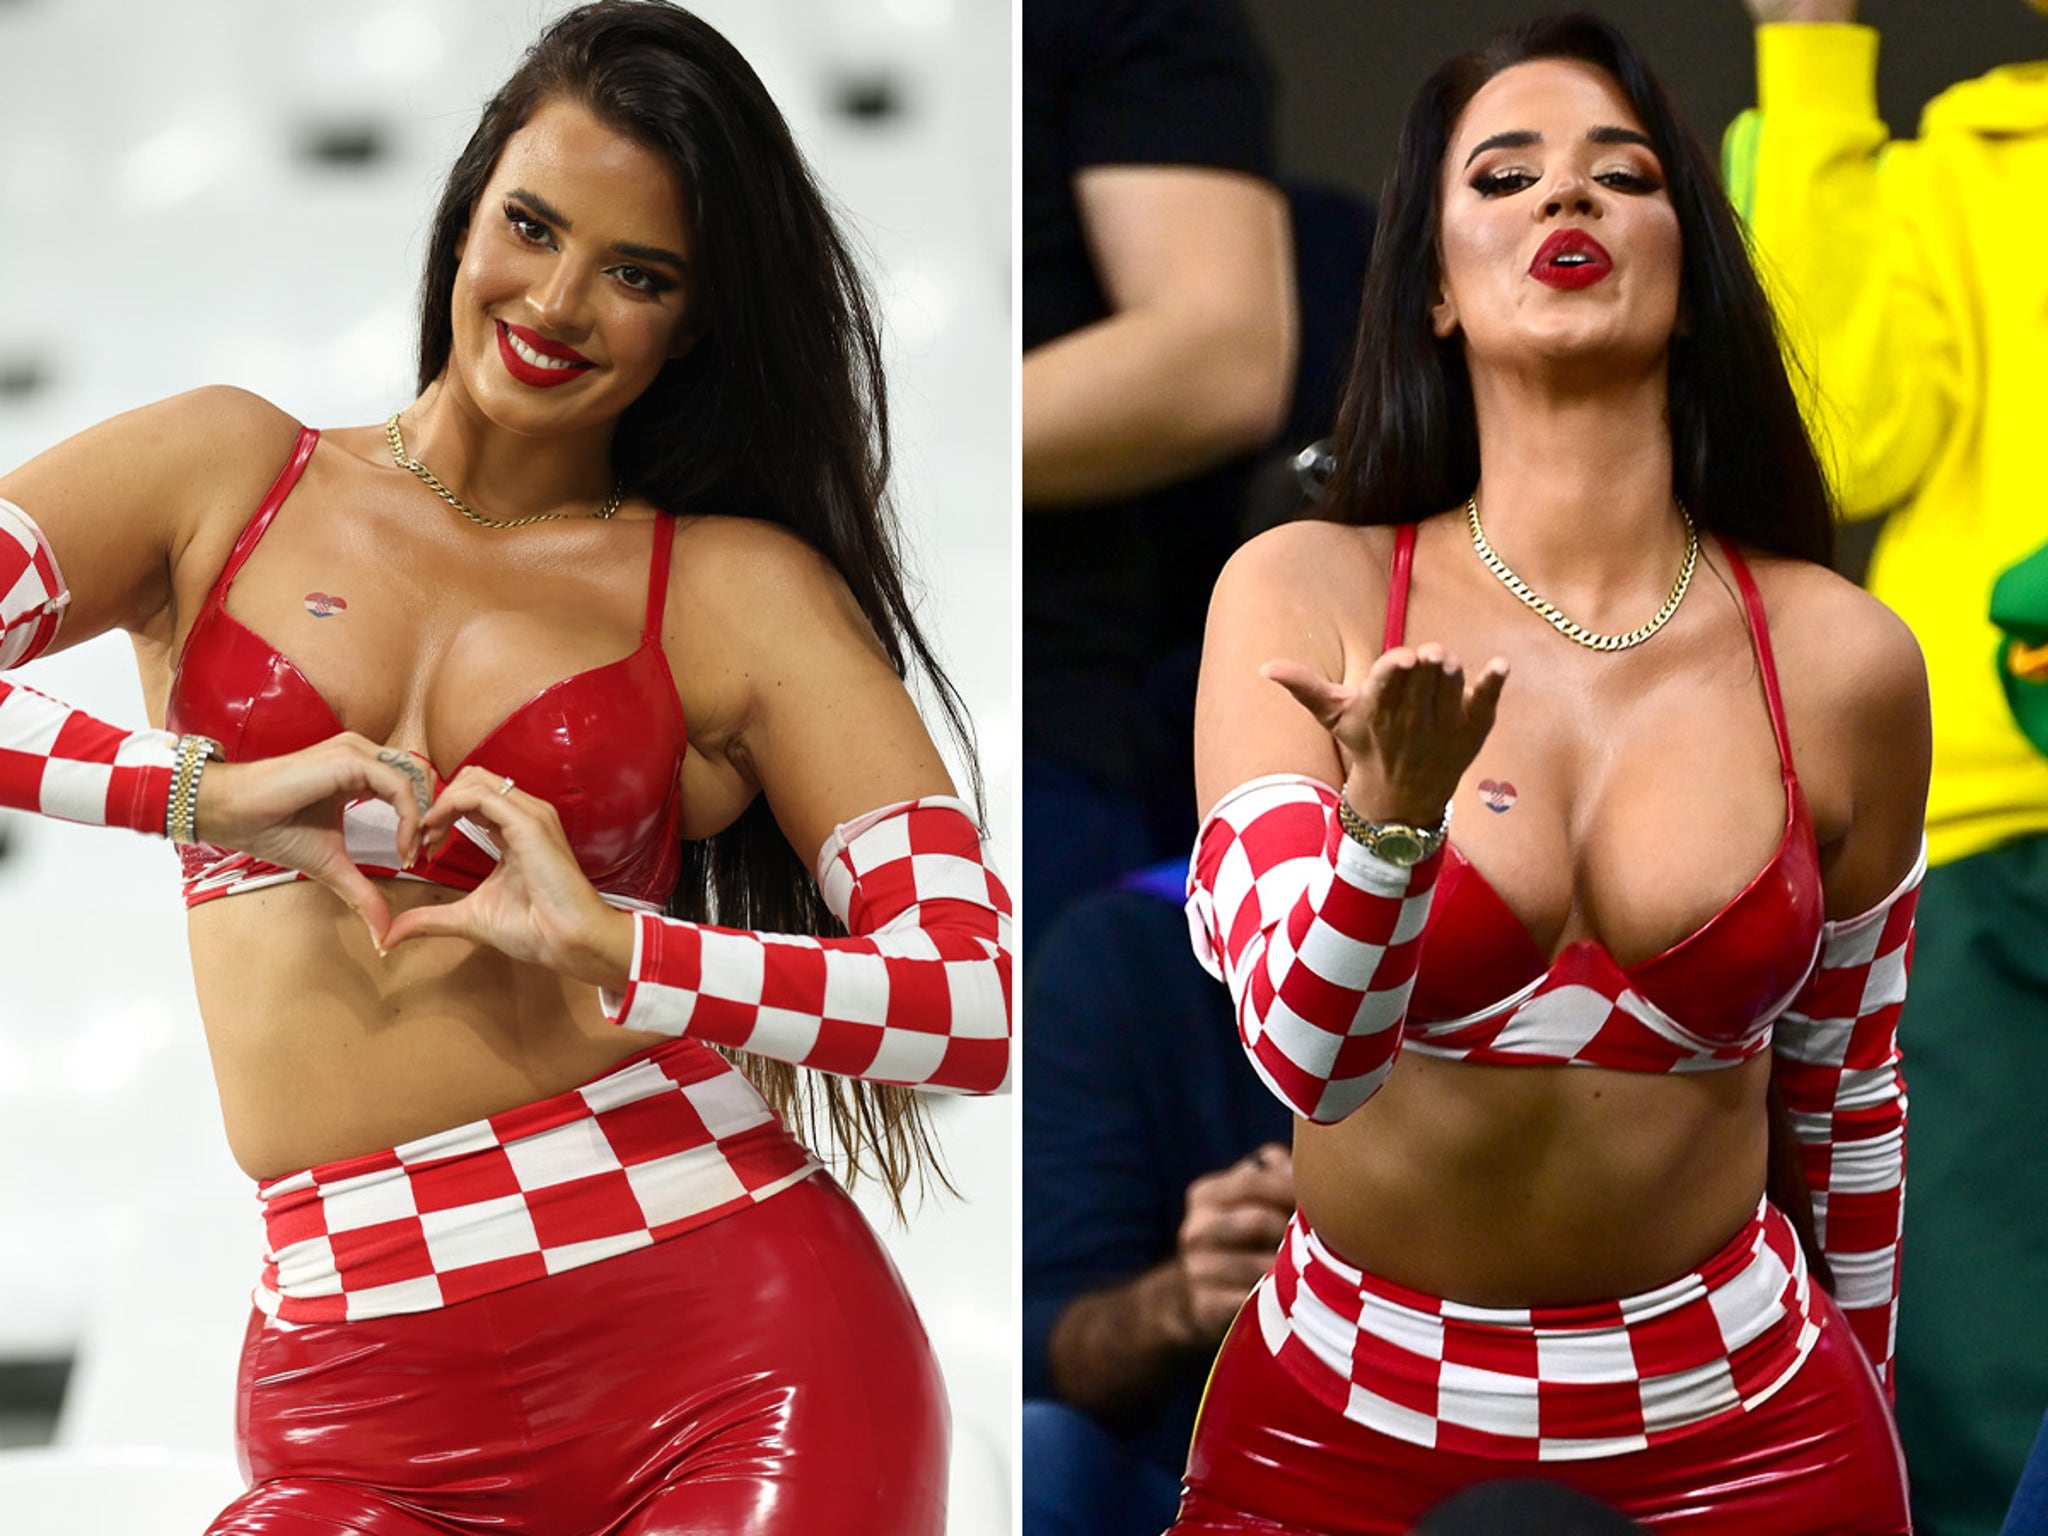 Model Ivana Knoll Celebrates Croatias Huge World Cup Win In Sexy Outfit pic pic